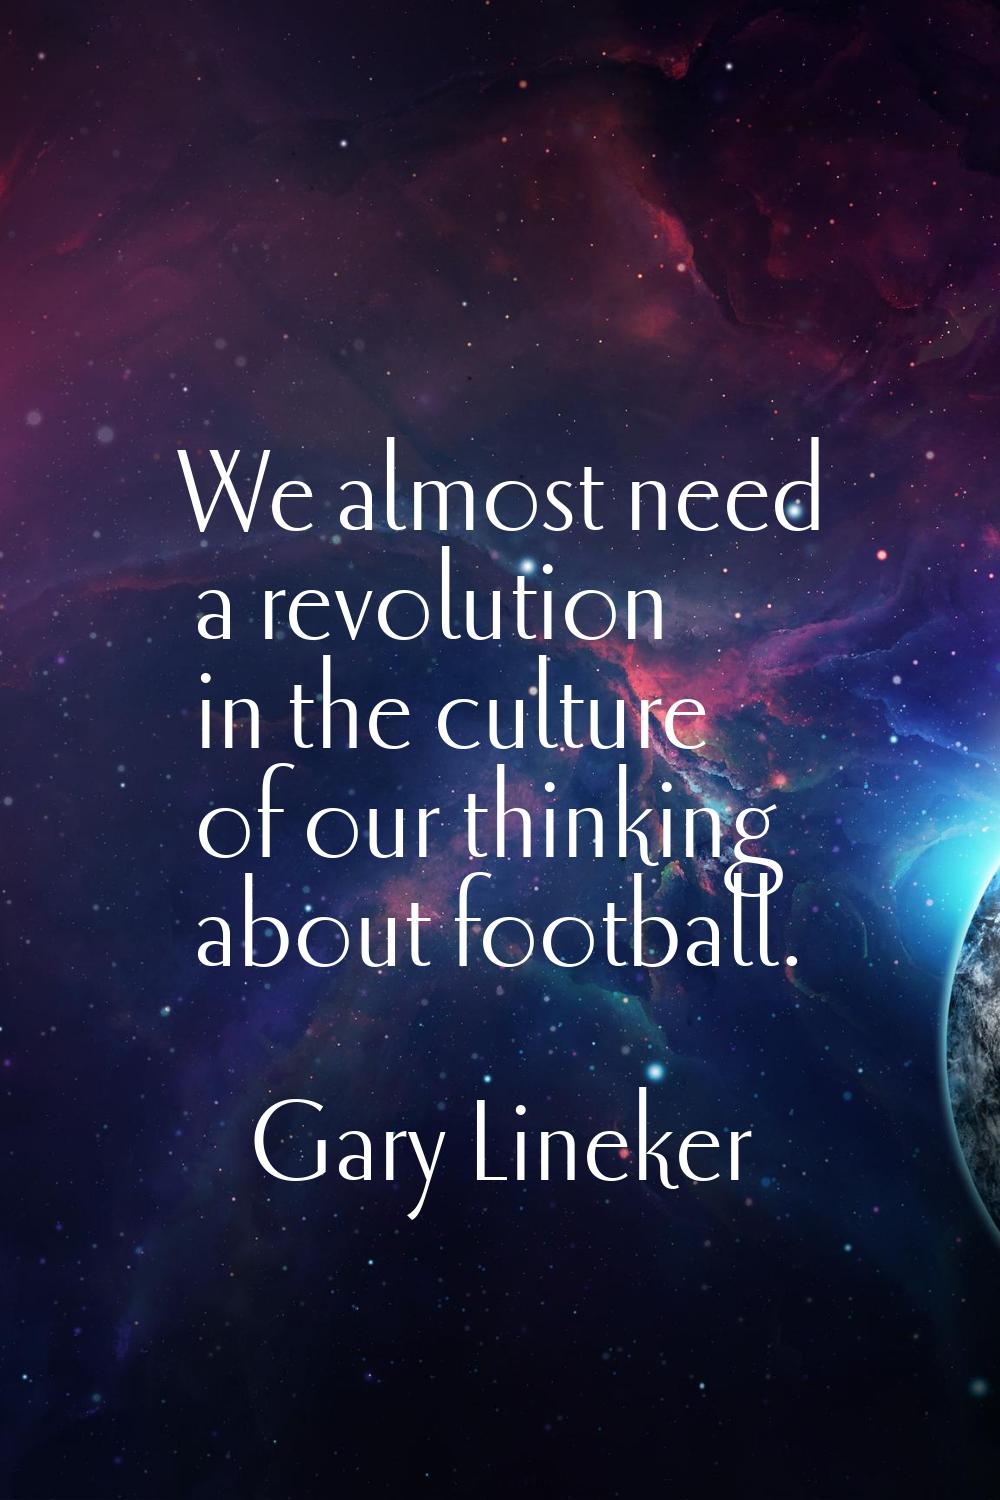 We almost need a revolution in the culture of our thinking about football.